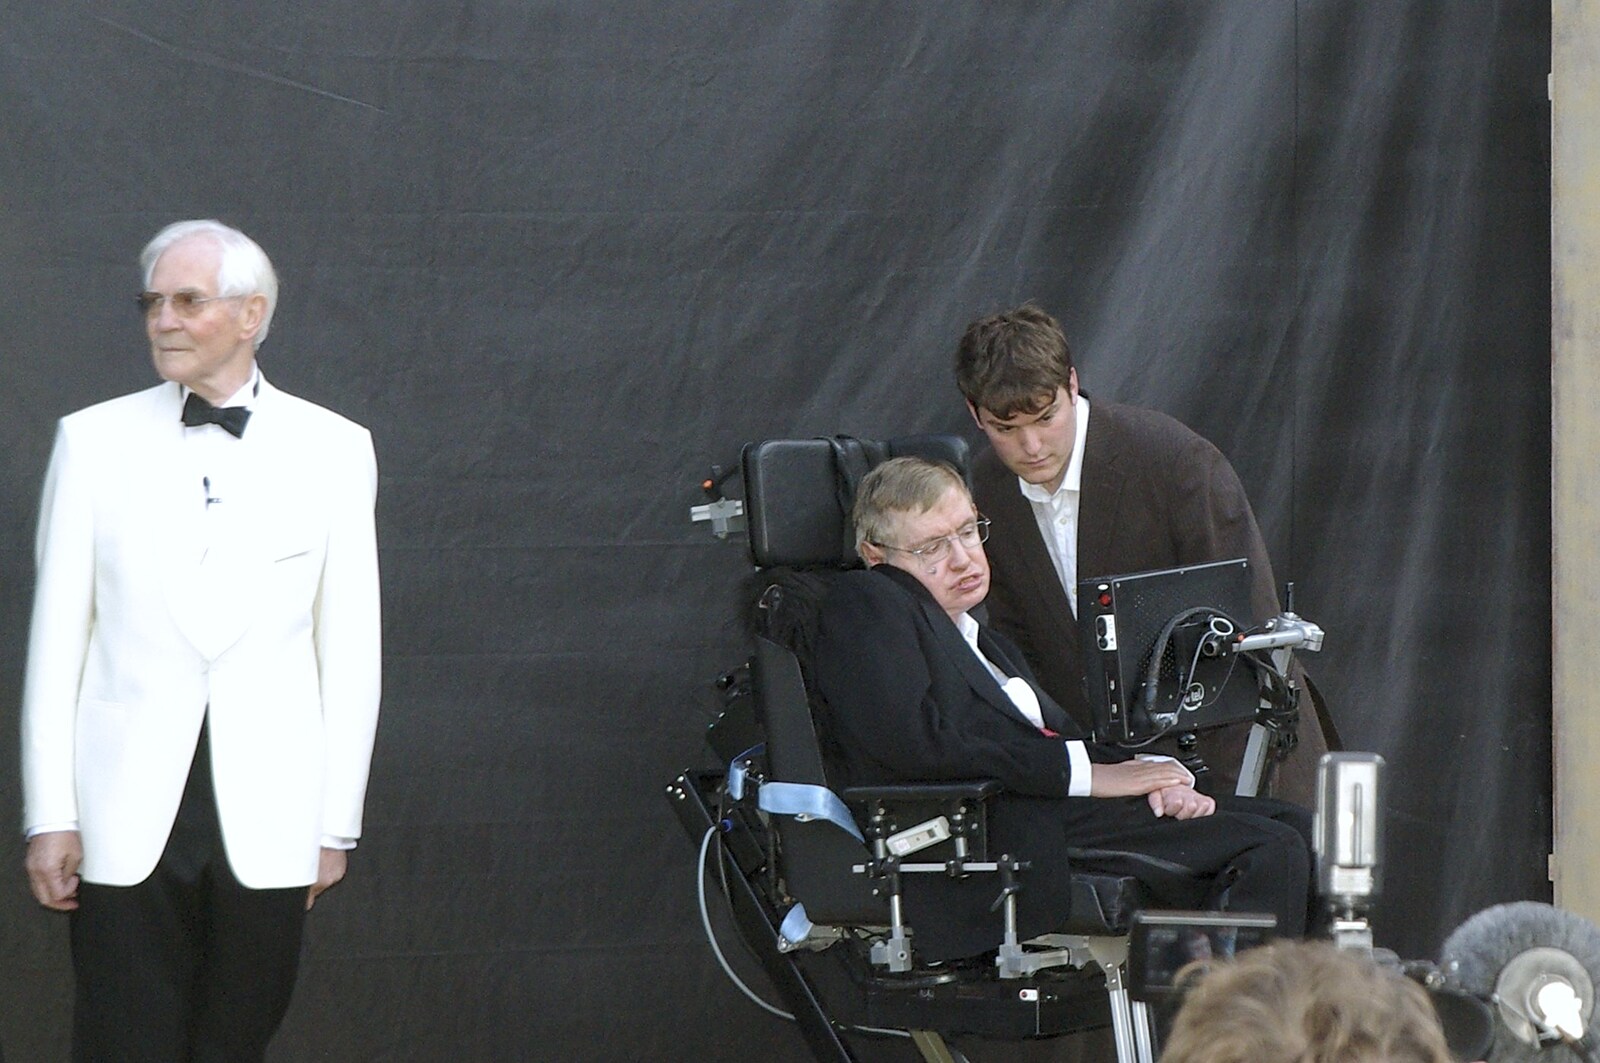 A Brief Time in History: Stephen Hawking and the Corpus Christi Clock, Benet Street, Cambridge - 19th September 2008: John Taylor (in the white tux) and Stephen Hawking